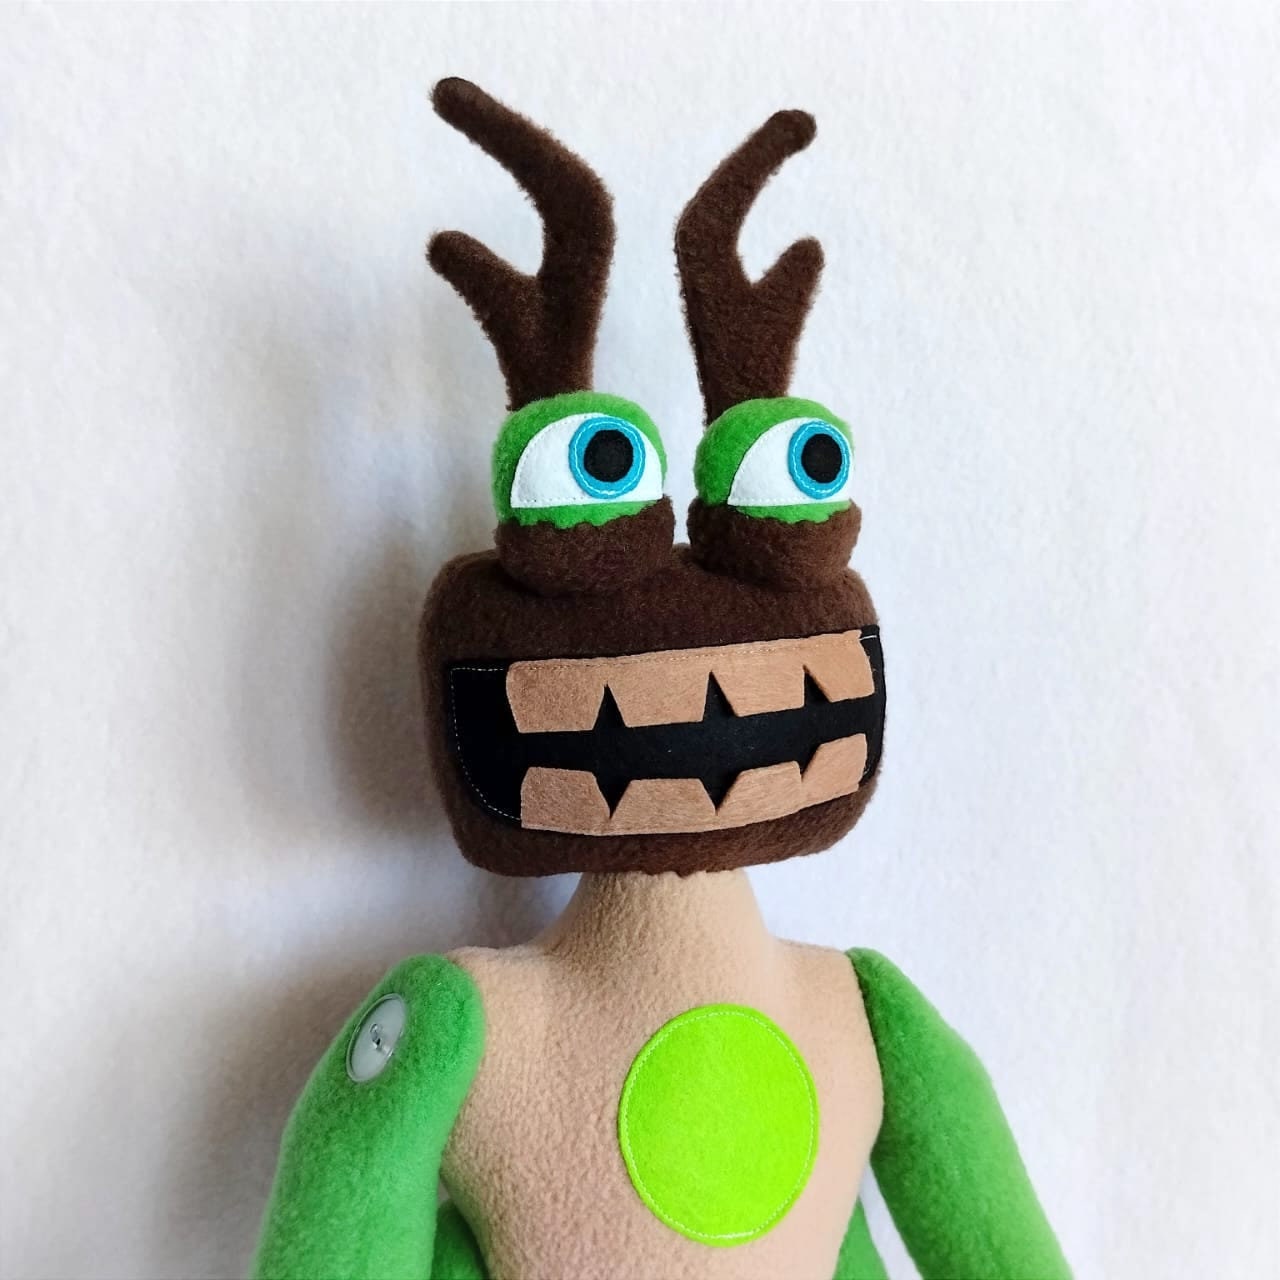 MR PLANT PLUSHIE NOW AVAILABLE FROM MAKESHIP! Music: @loyer.music  #weirdcore #dreamcore #worldofmrplant